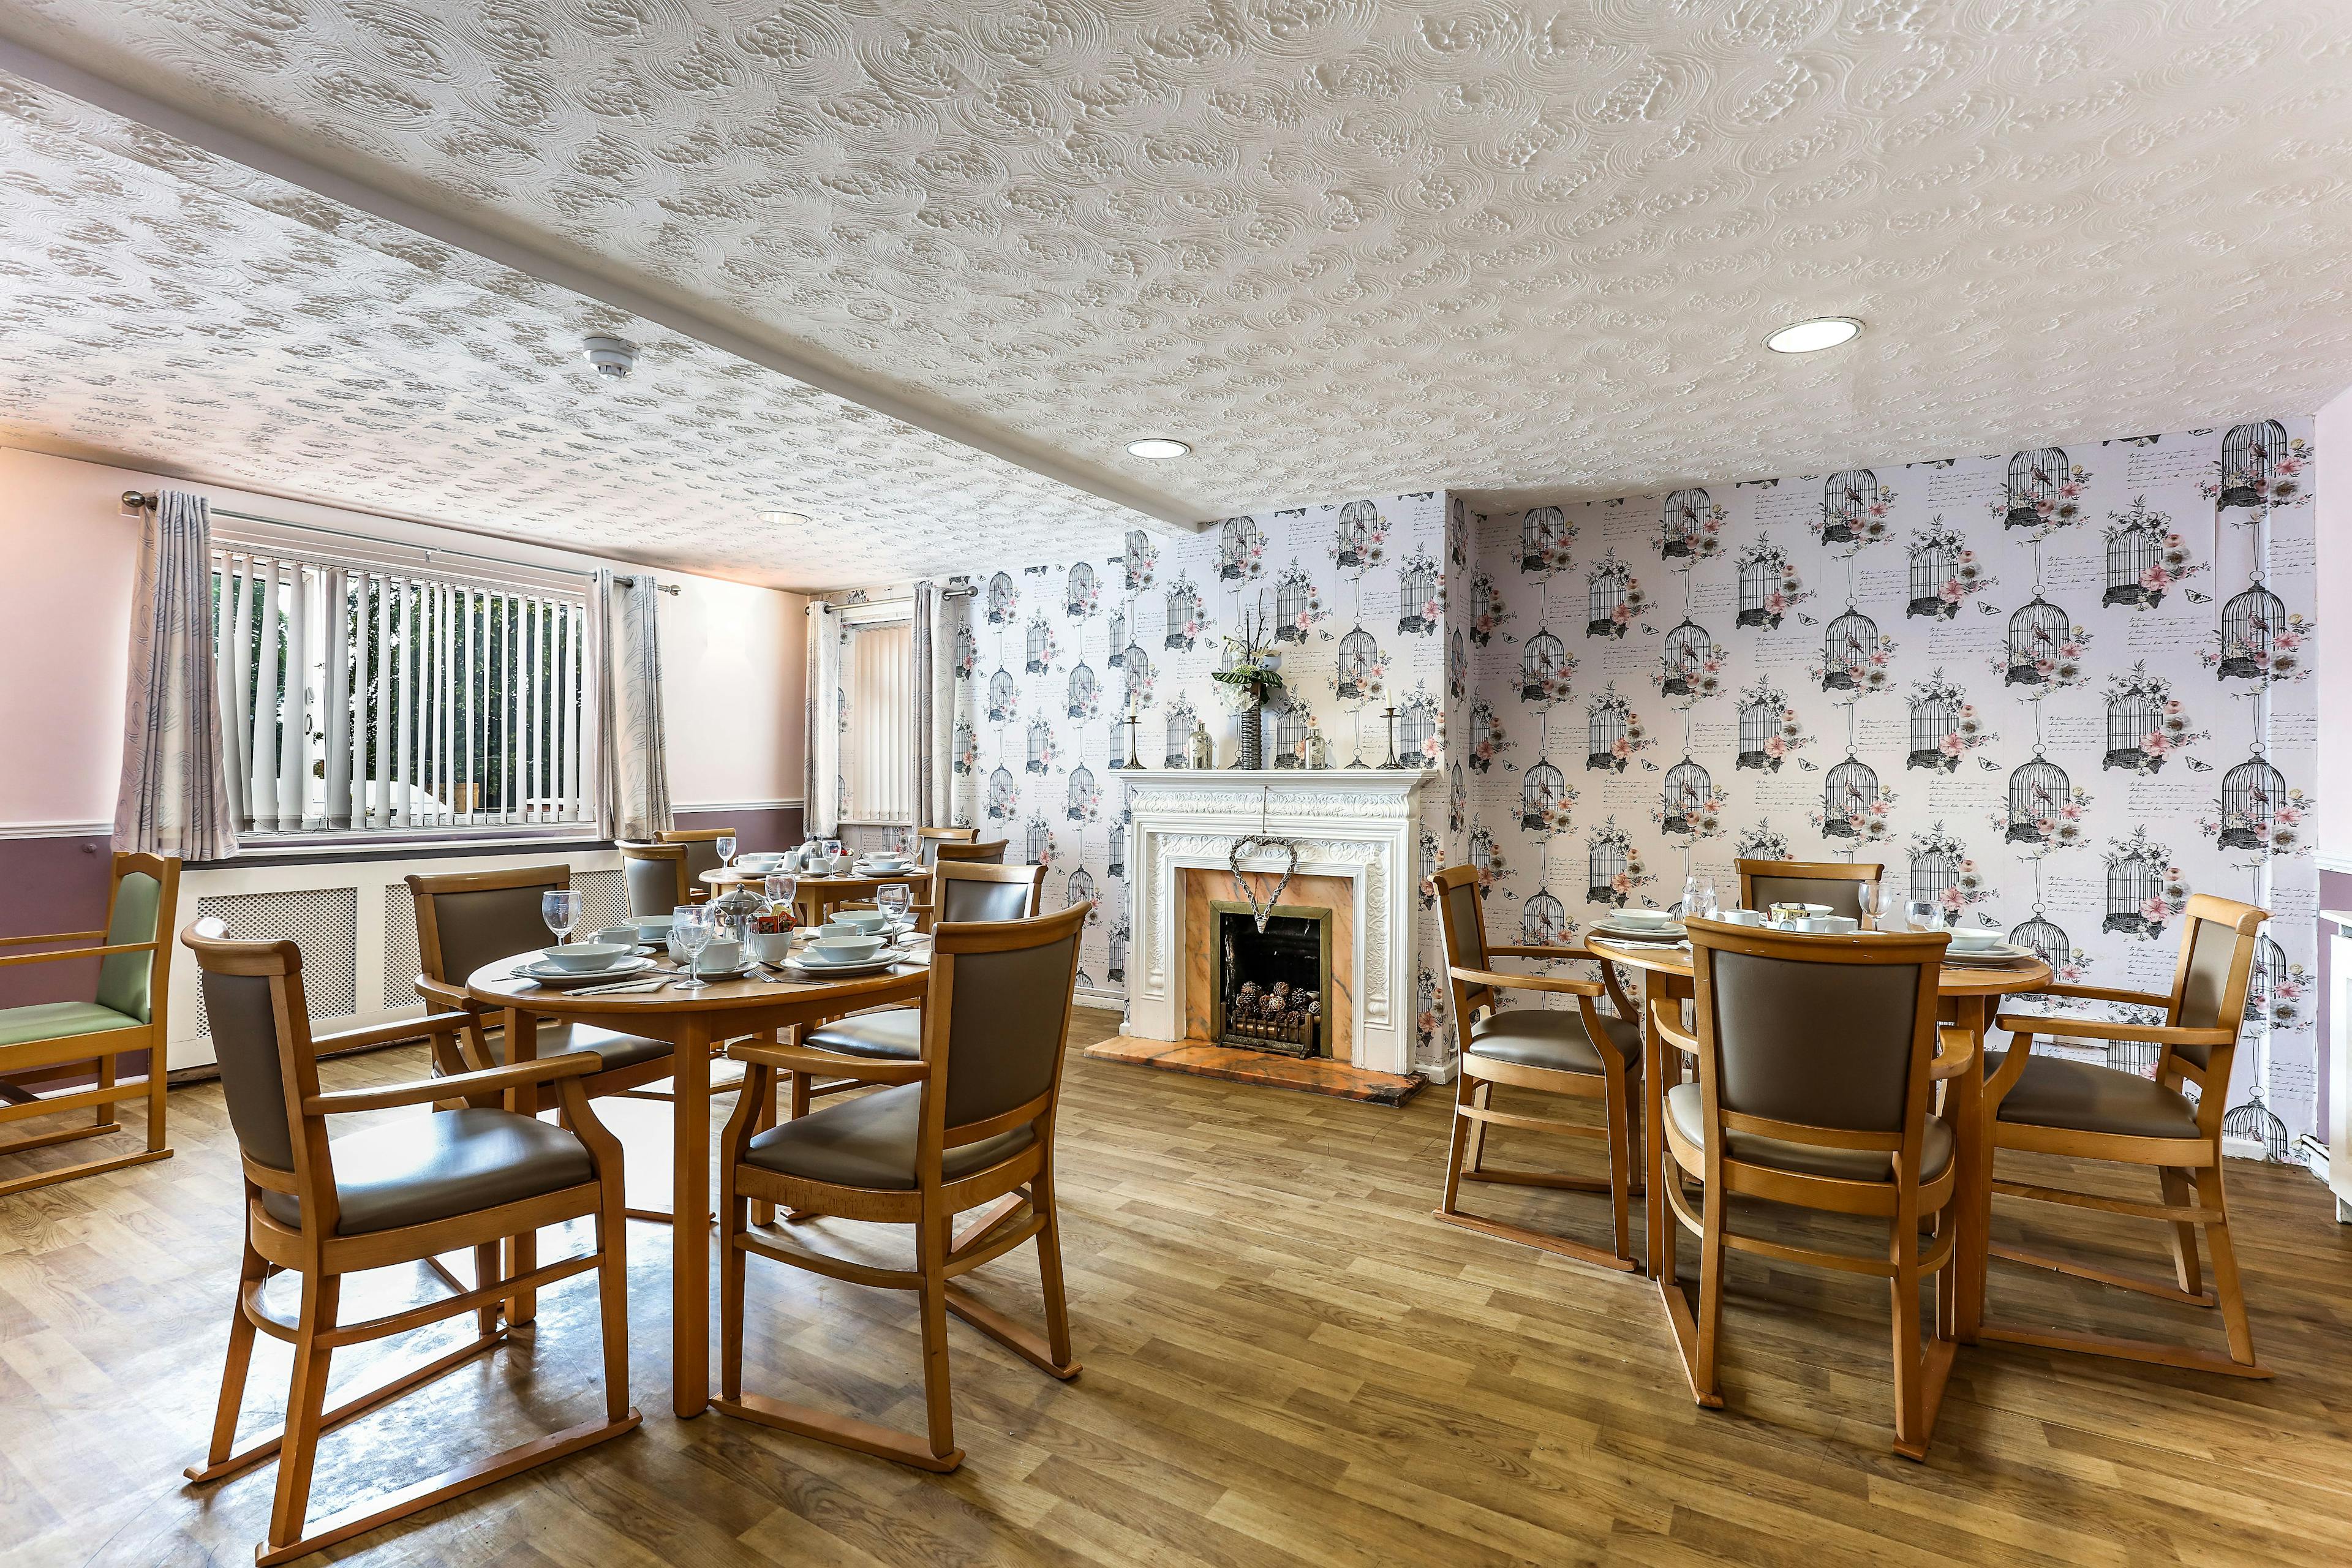 Dining Area of Woodlands Court Care Home in Wigan, Greater Manchester